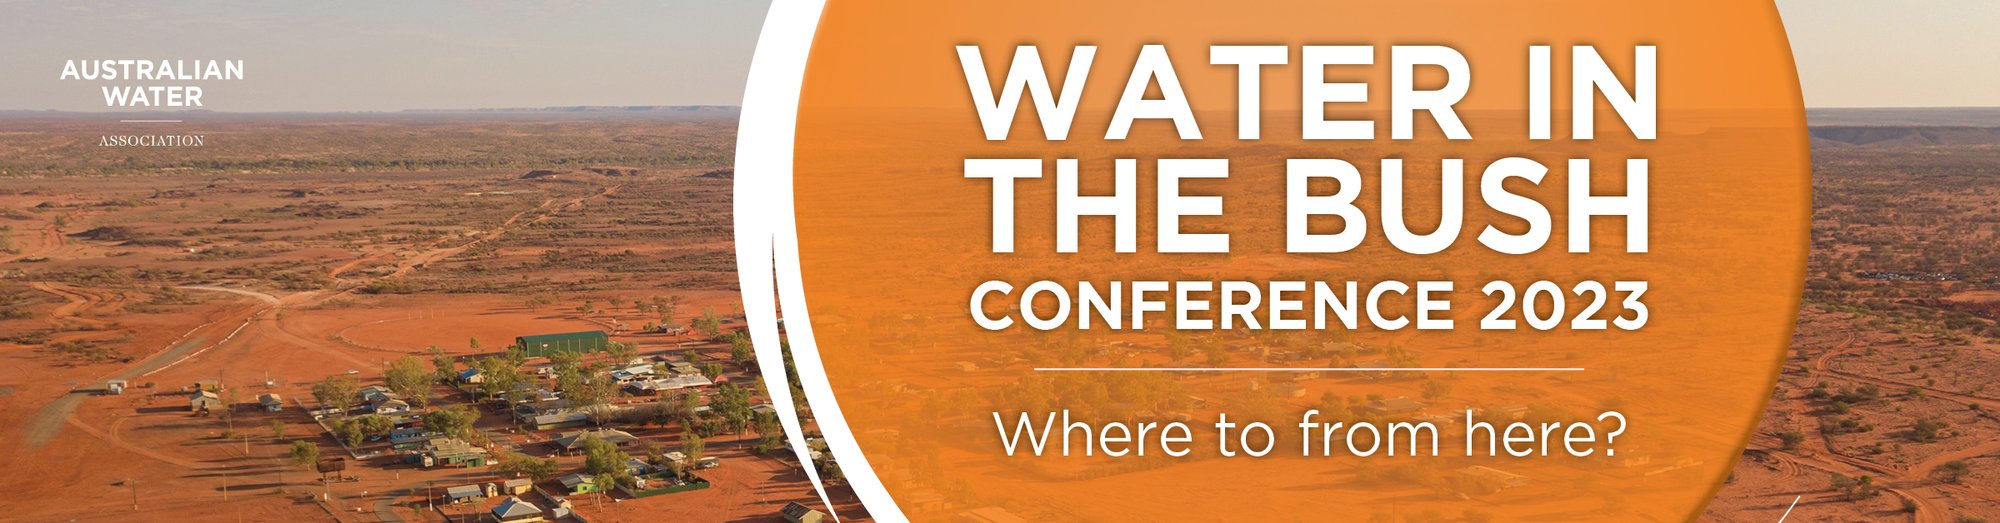 Water in the Bush 2023_HubSpot Event Banner 1200x314px